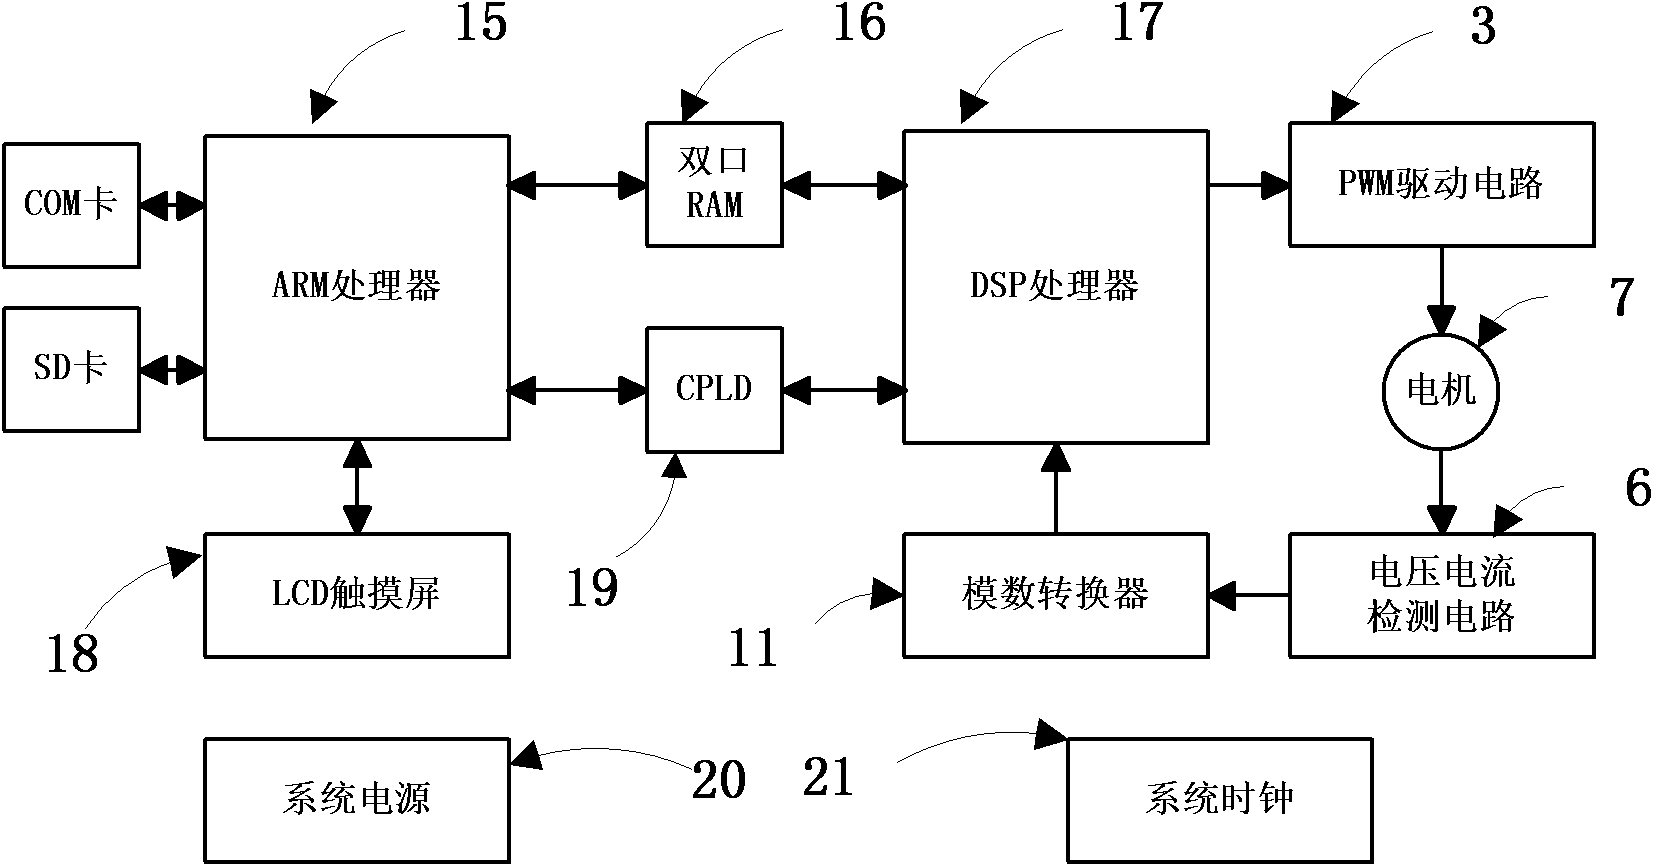 Motor comprehensive control apparatus based on ARM (Advanced RISC Machines) and DSP (digital signal processor)